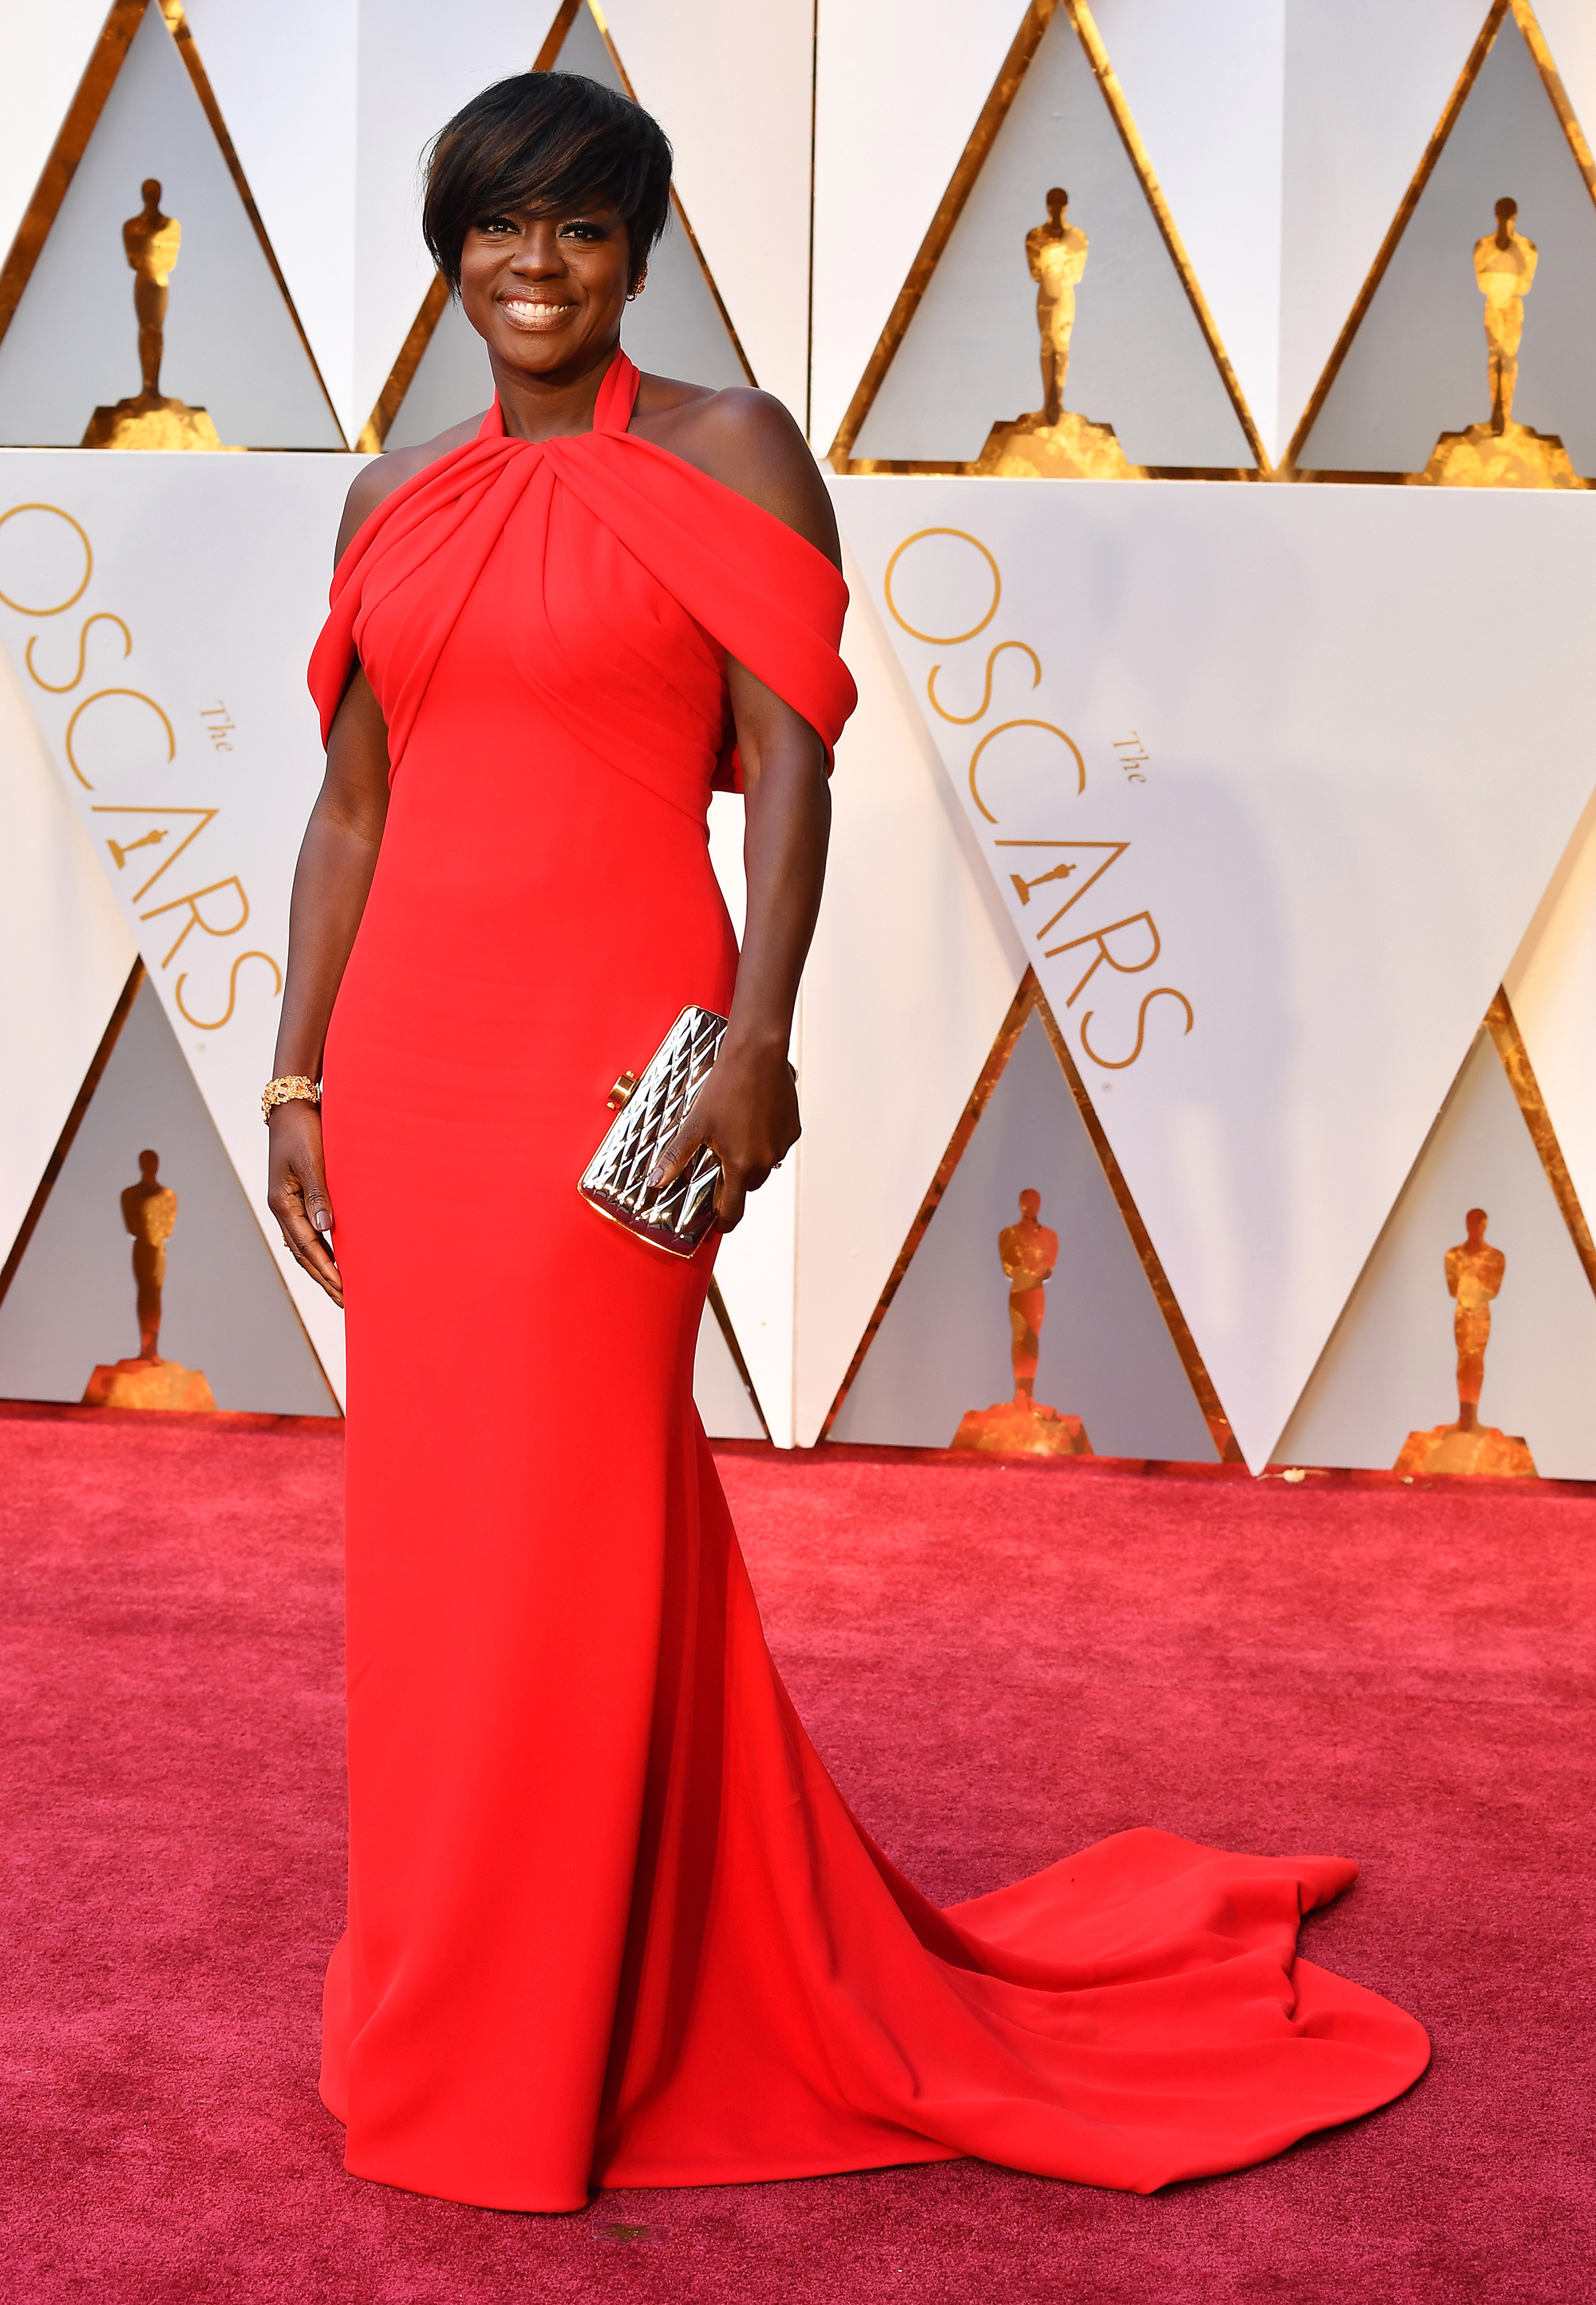 Viola Davis on the red carpet for the 89th Oscars, on Feb. 26, 2017 in Hollywood, Calif.